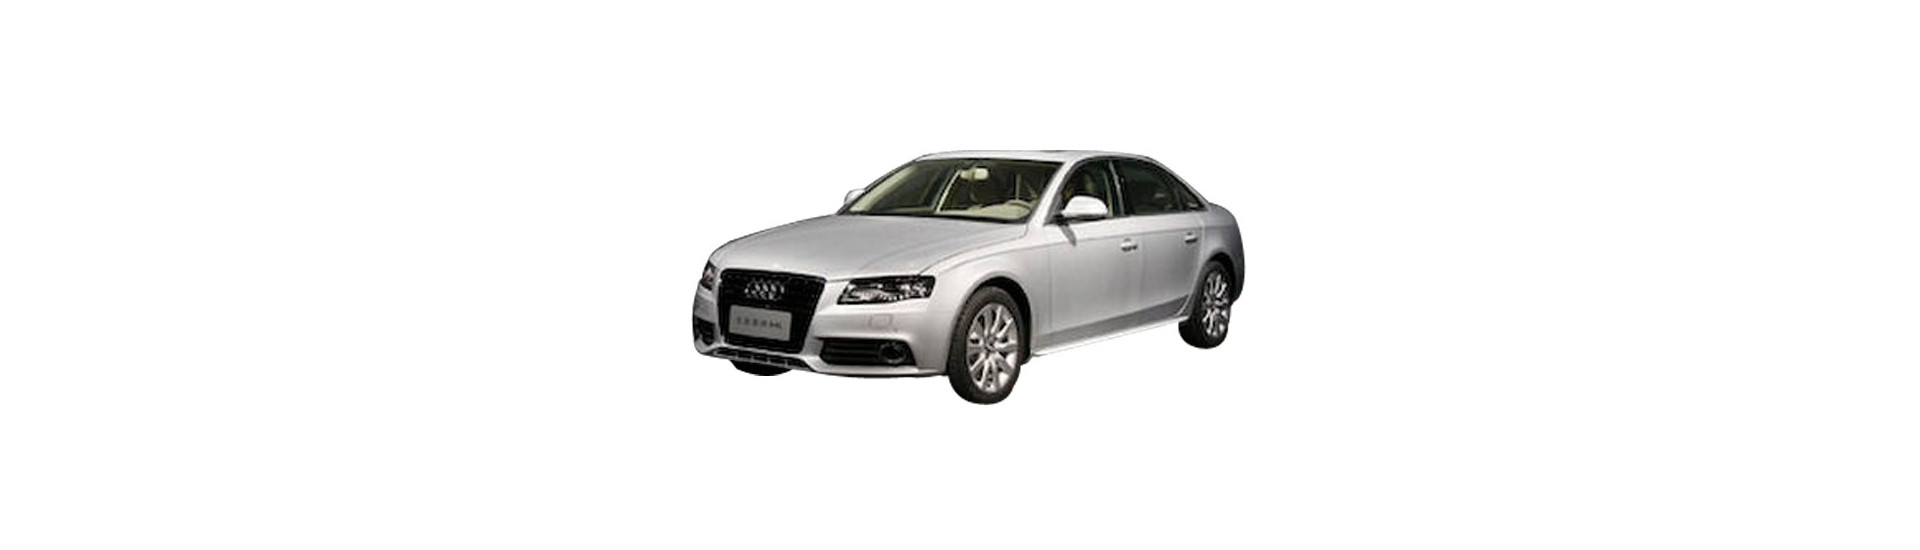 camera mers inapoi audi a4